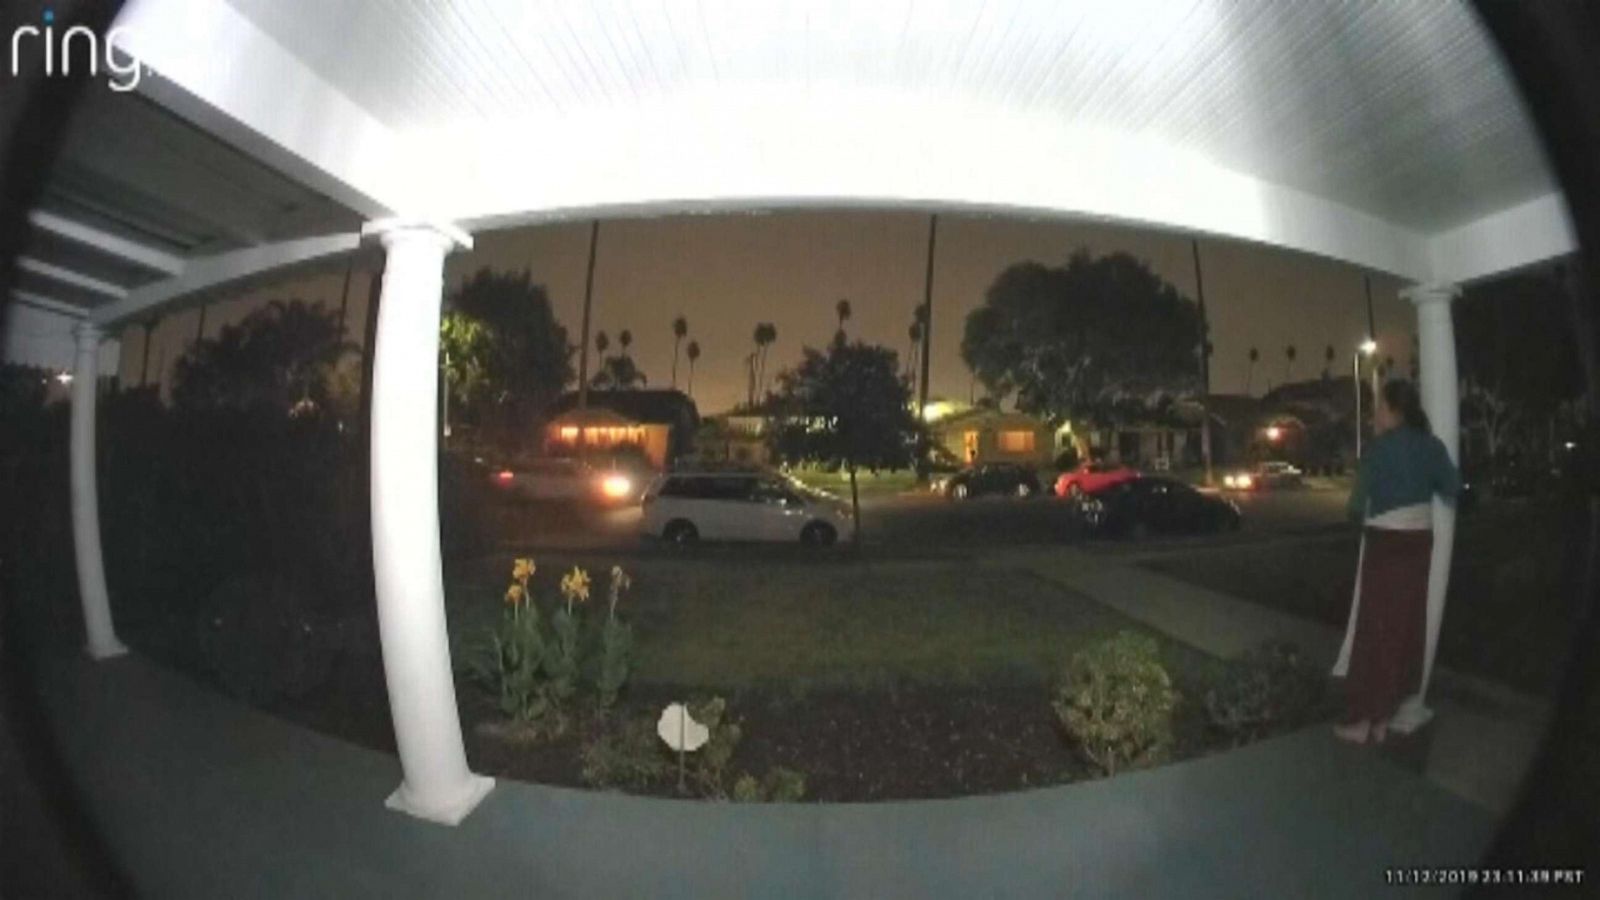 Video Doorbell Footage that Is Admissible in Court